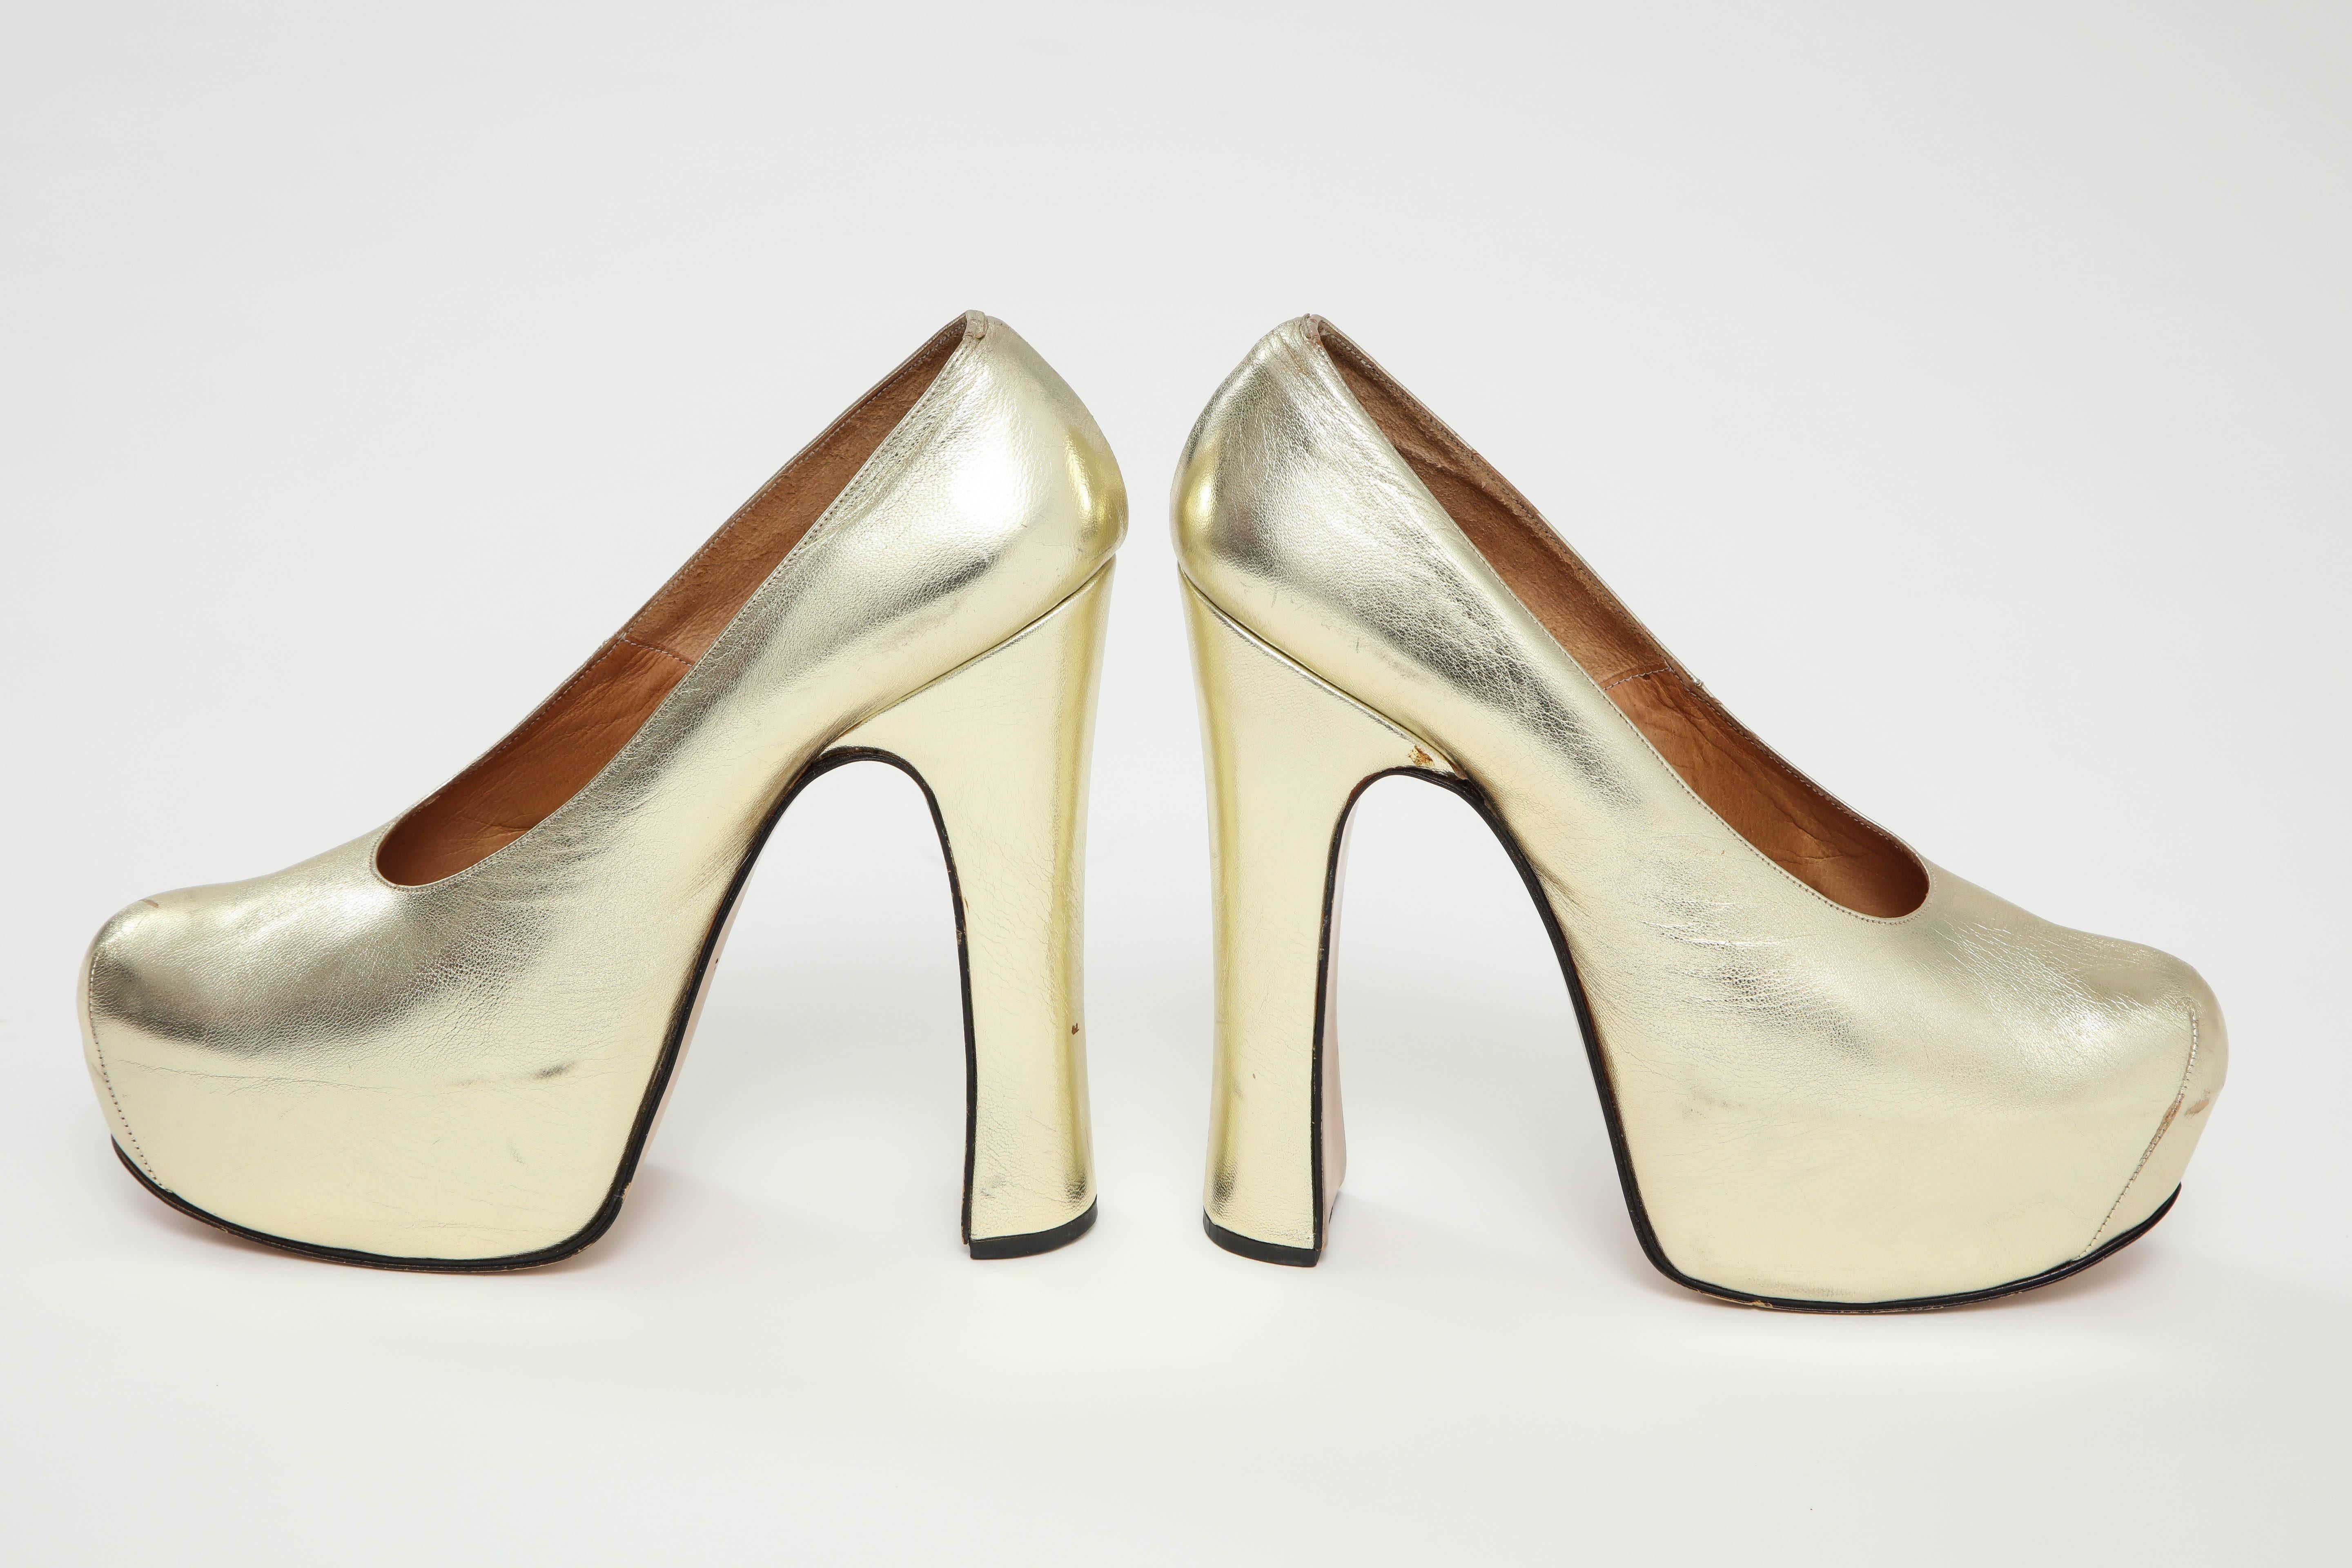 English Iconic Rare Pair of Vivienne Westwood Shoes For Sale